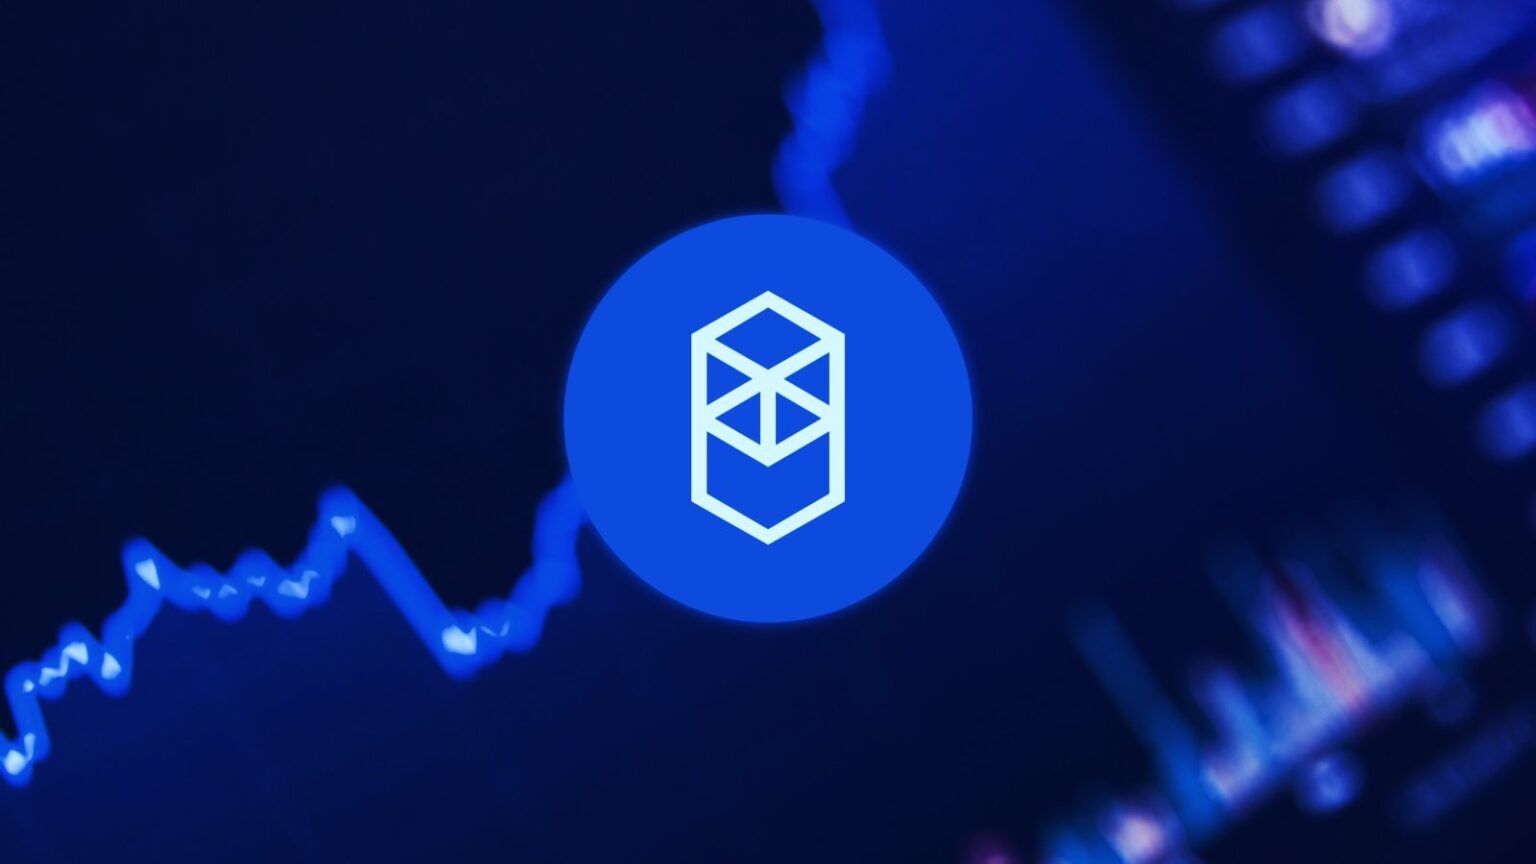 The main reason behind Fantom's popularity is that it's showing positive results in the long run. Here are things you should know before investing.